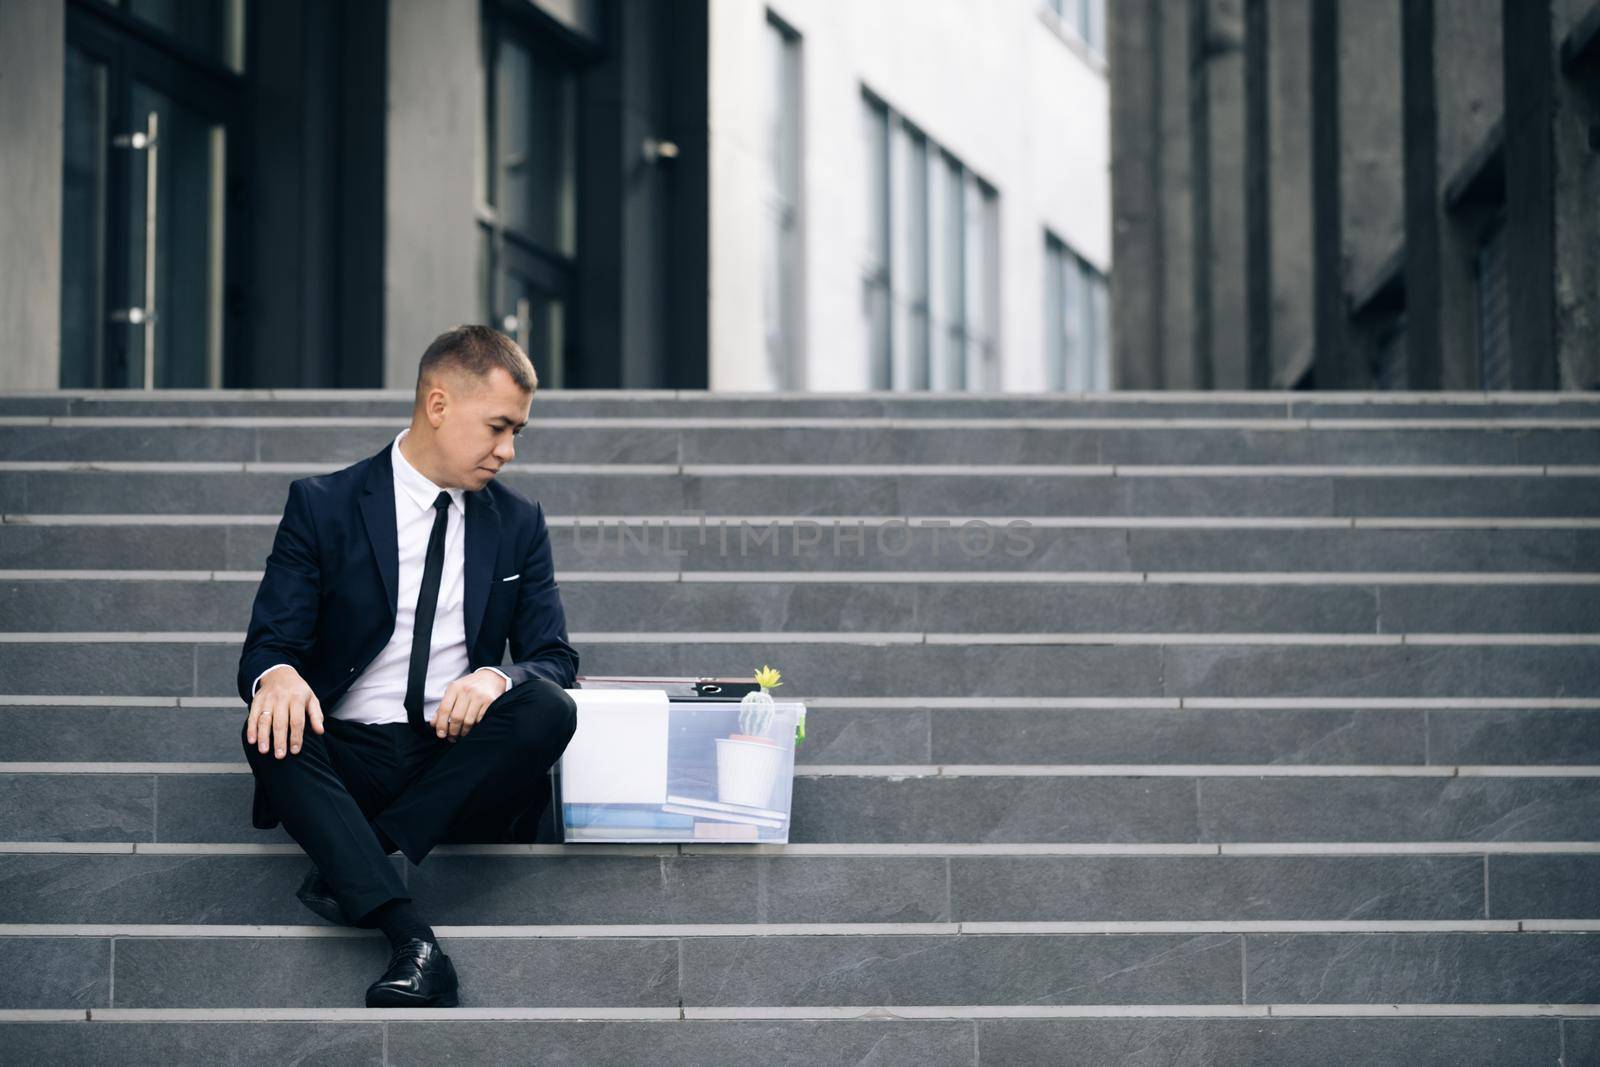 Male office worker in despair lost job. Sad businessman sitting on stairs outdoor with box of stuff as lost business. Fired man. Unemployment rate growing due pandemic by uflypro